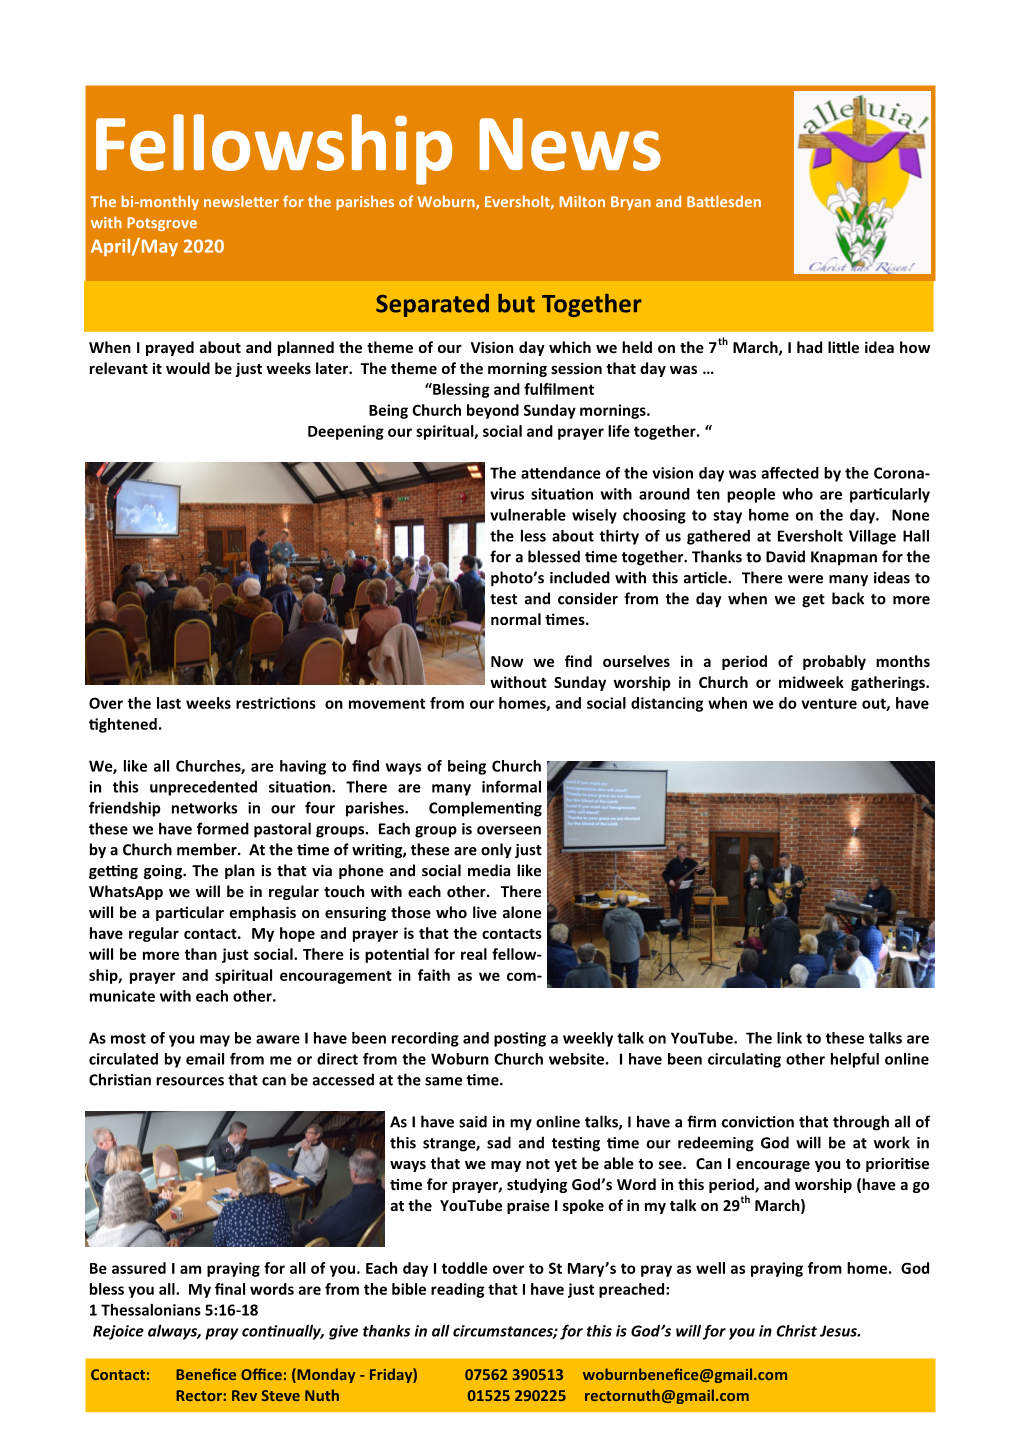 Fellowship News the Bi-Monthly Newsletter for the Parishes of Woburn, Eversholt, Milton Bryan and Battlesden with Potsgrove April/May 2020